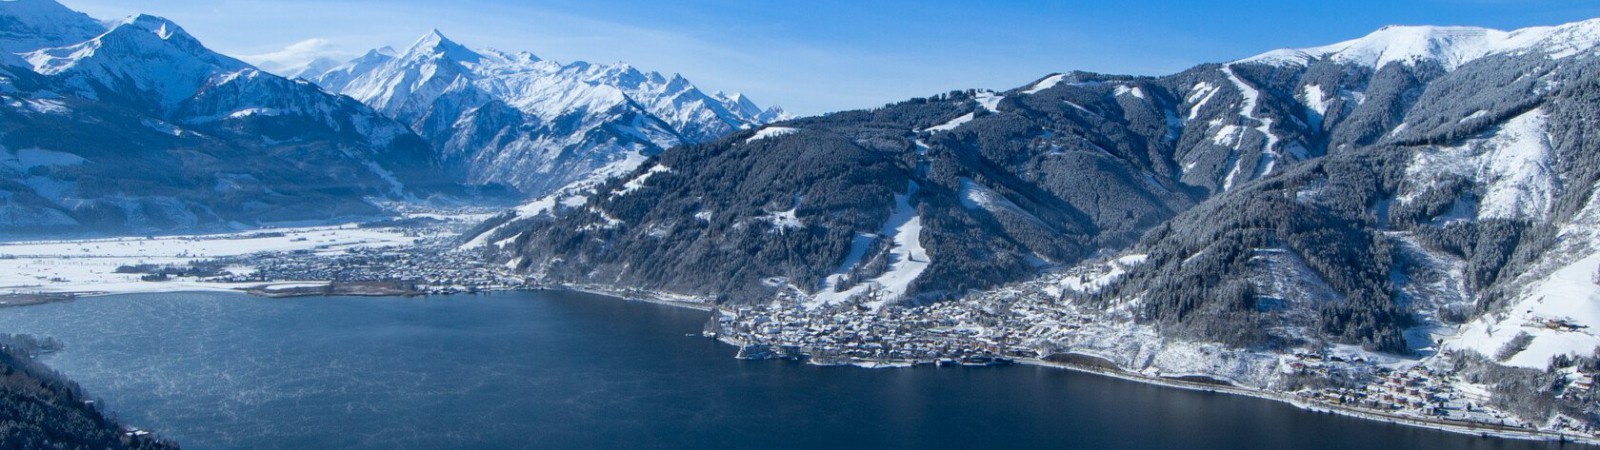 Zell am See winter panorama Zellersee